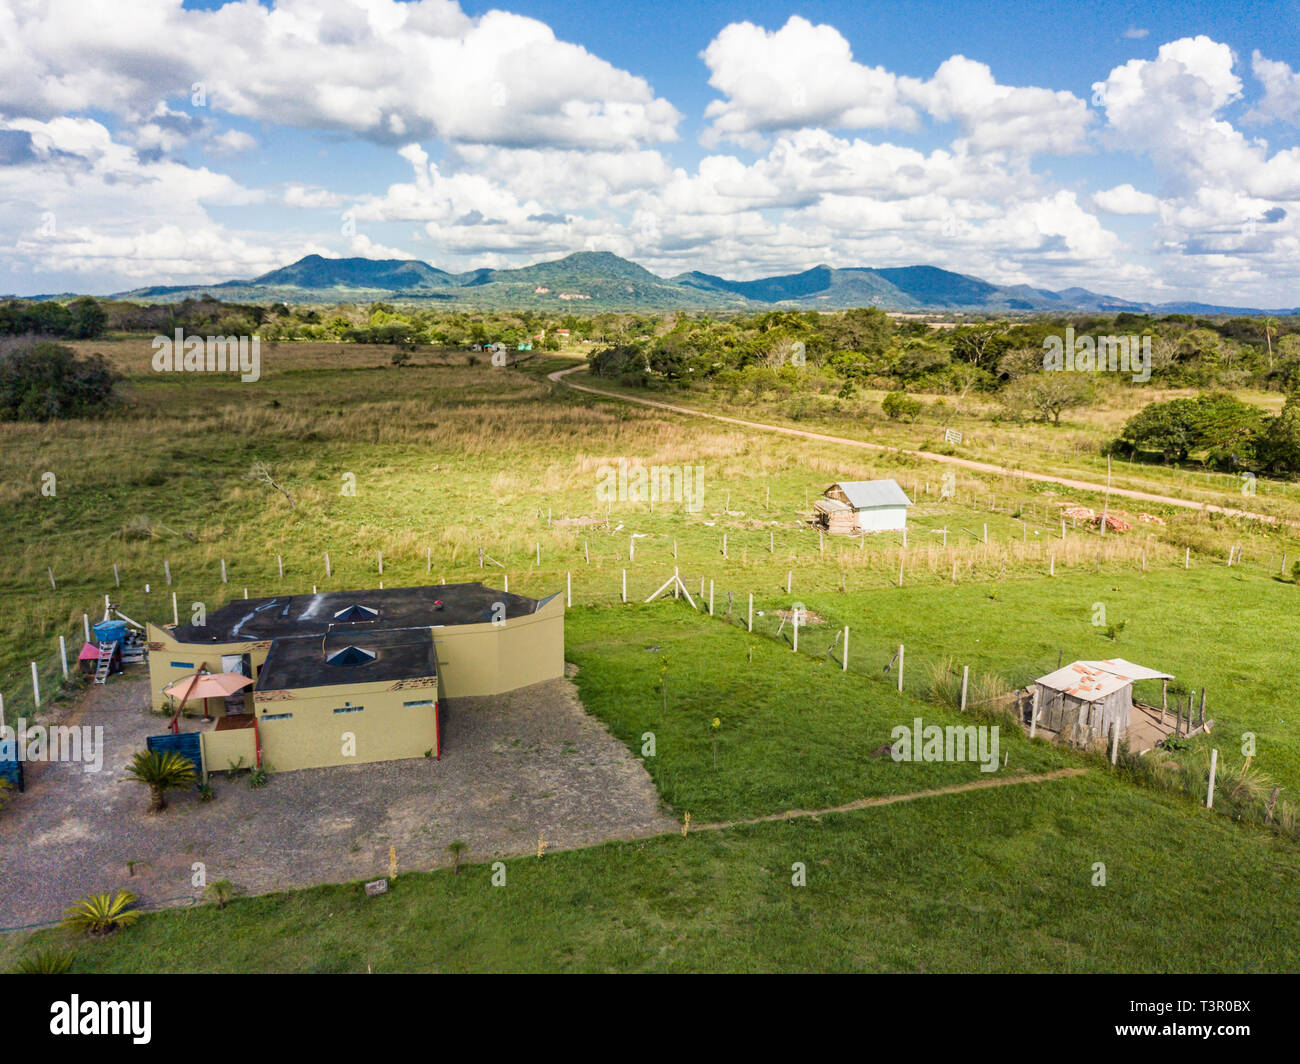 Aerial view in Paraguay overlooking the Ybytyruzu Mountains. Stock Photo